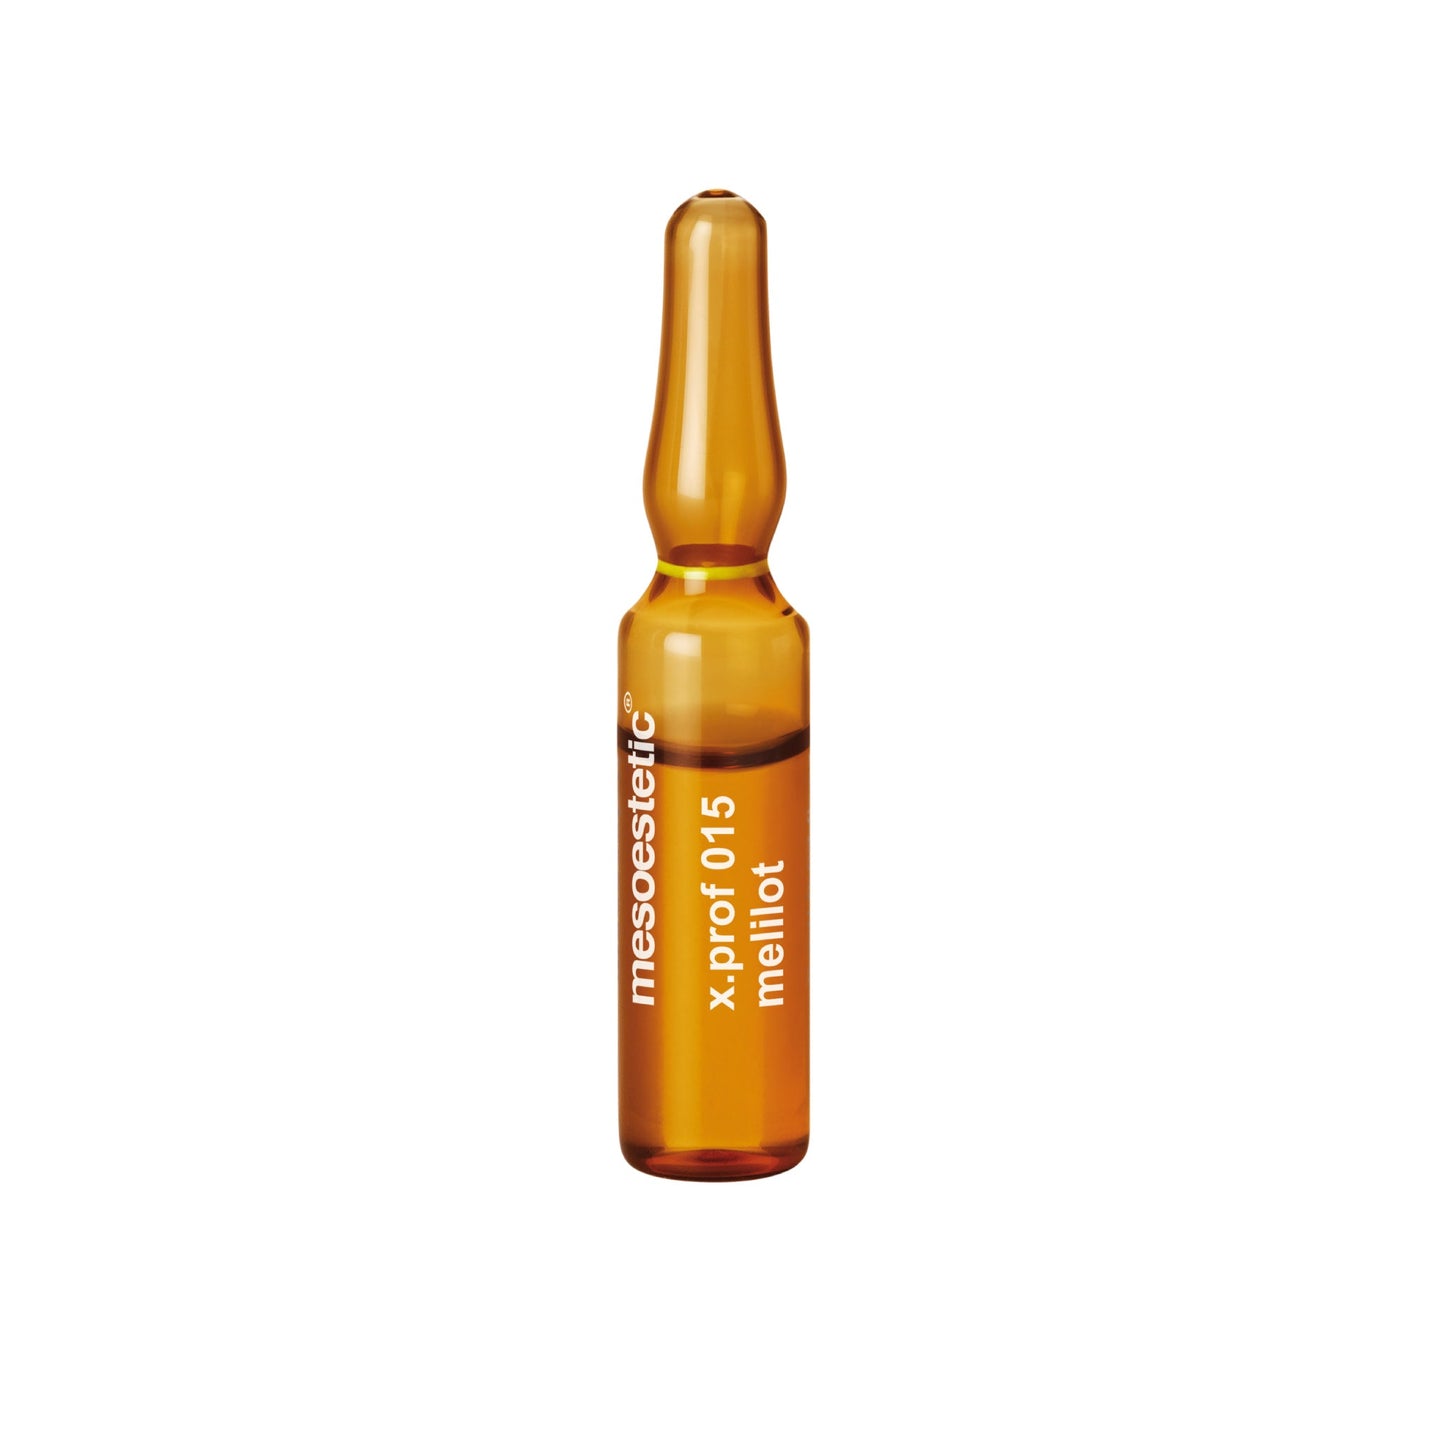 x.prof 015 melilot and rutin extract ampoules